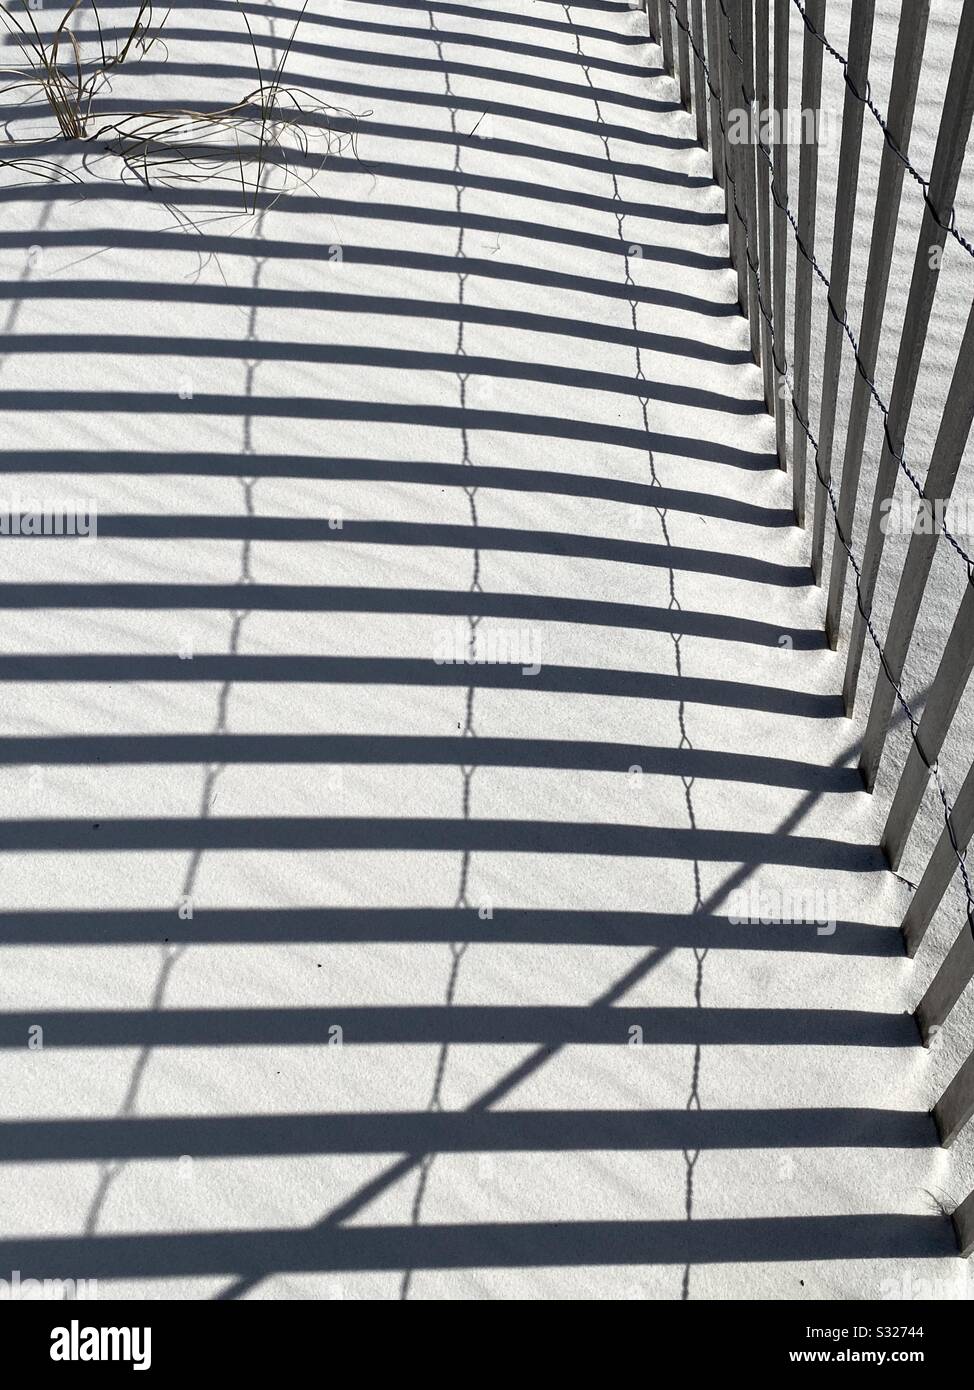 Shadow lines cast onto white sand beach from a wooden fence Stock Photo